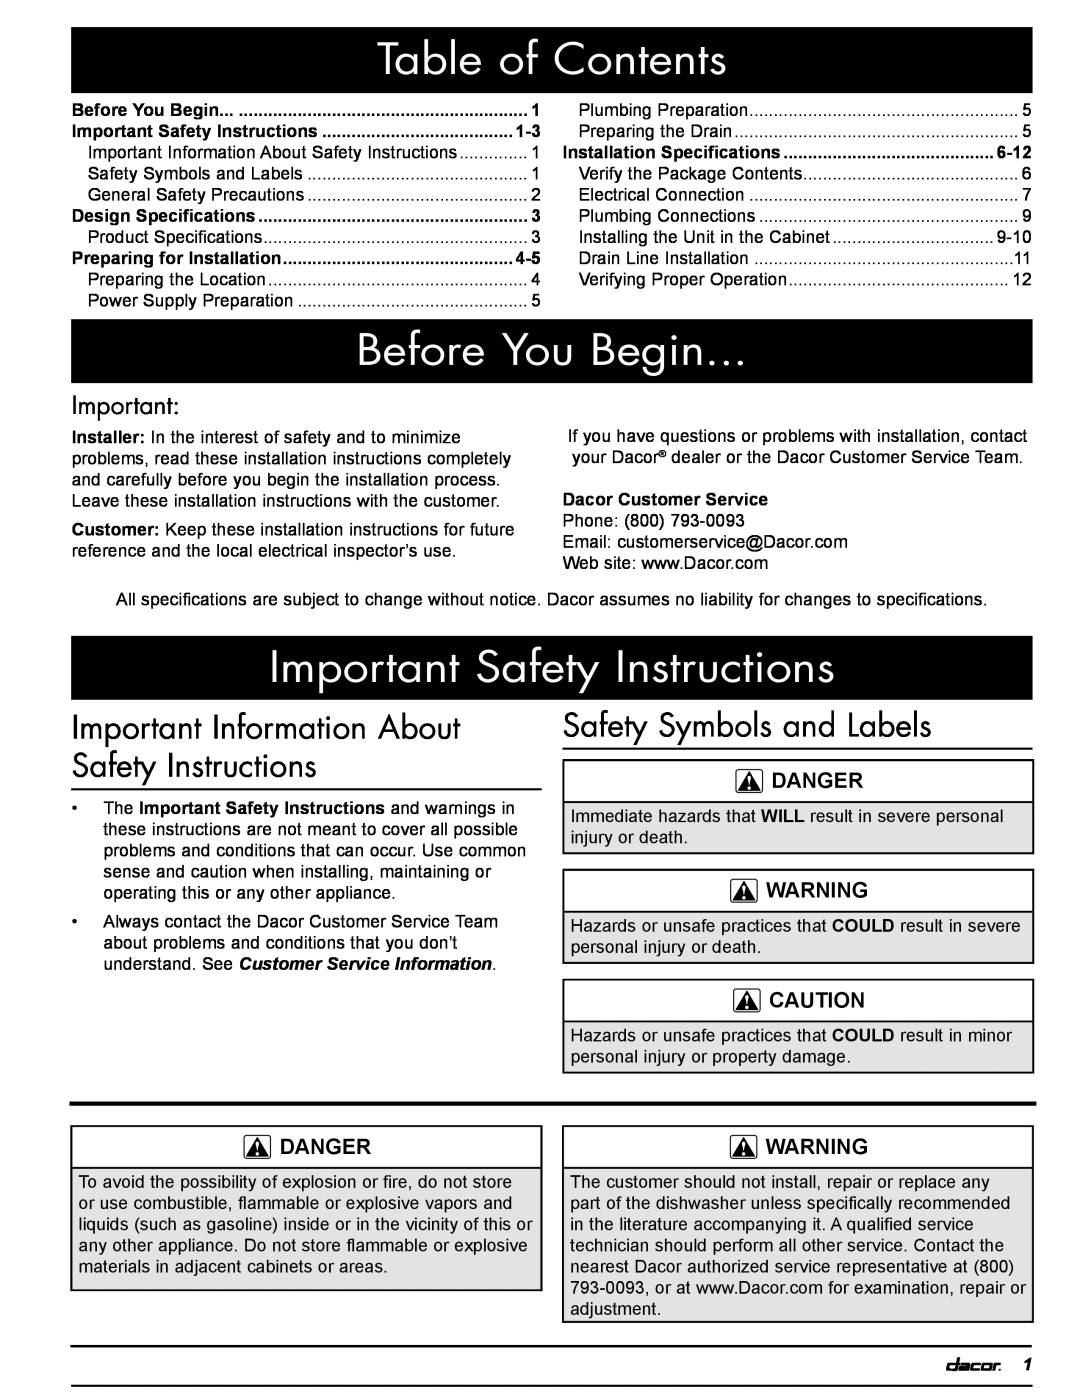 Dacor PD, 24GN Table of Contents, Before You Begin, Important Safety Instructions, Safety Symbols and Labels, Danger, 6-12 